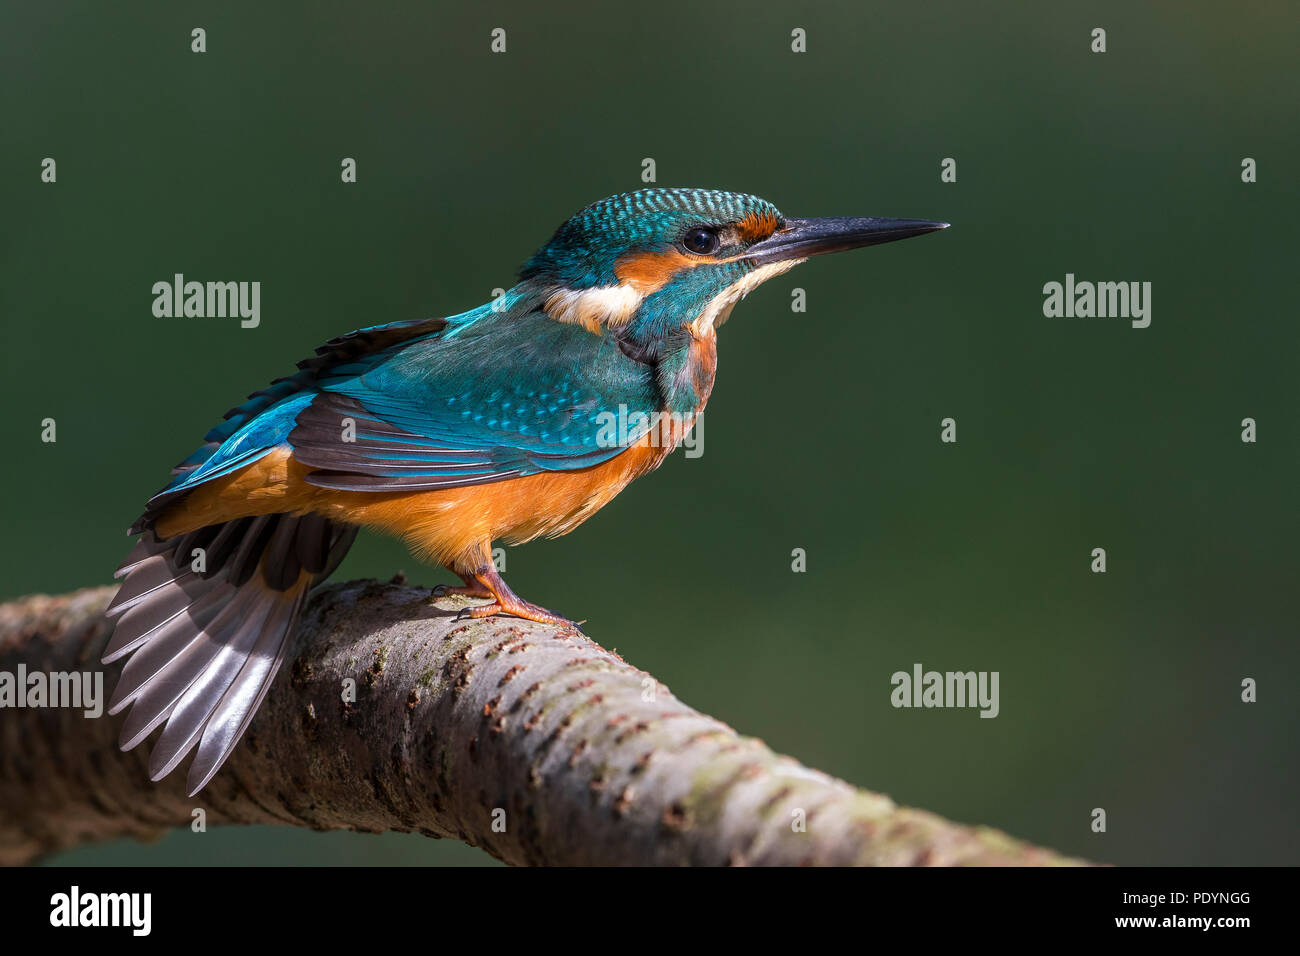 Kingfisher Alcedo atthis commun ; Banque D'Images